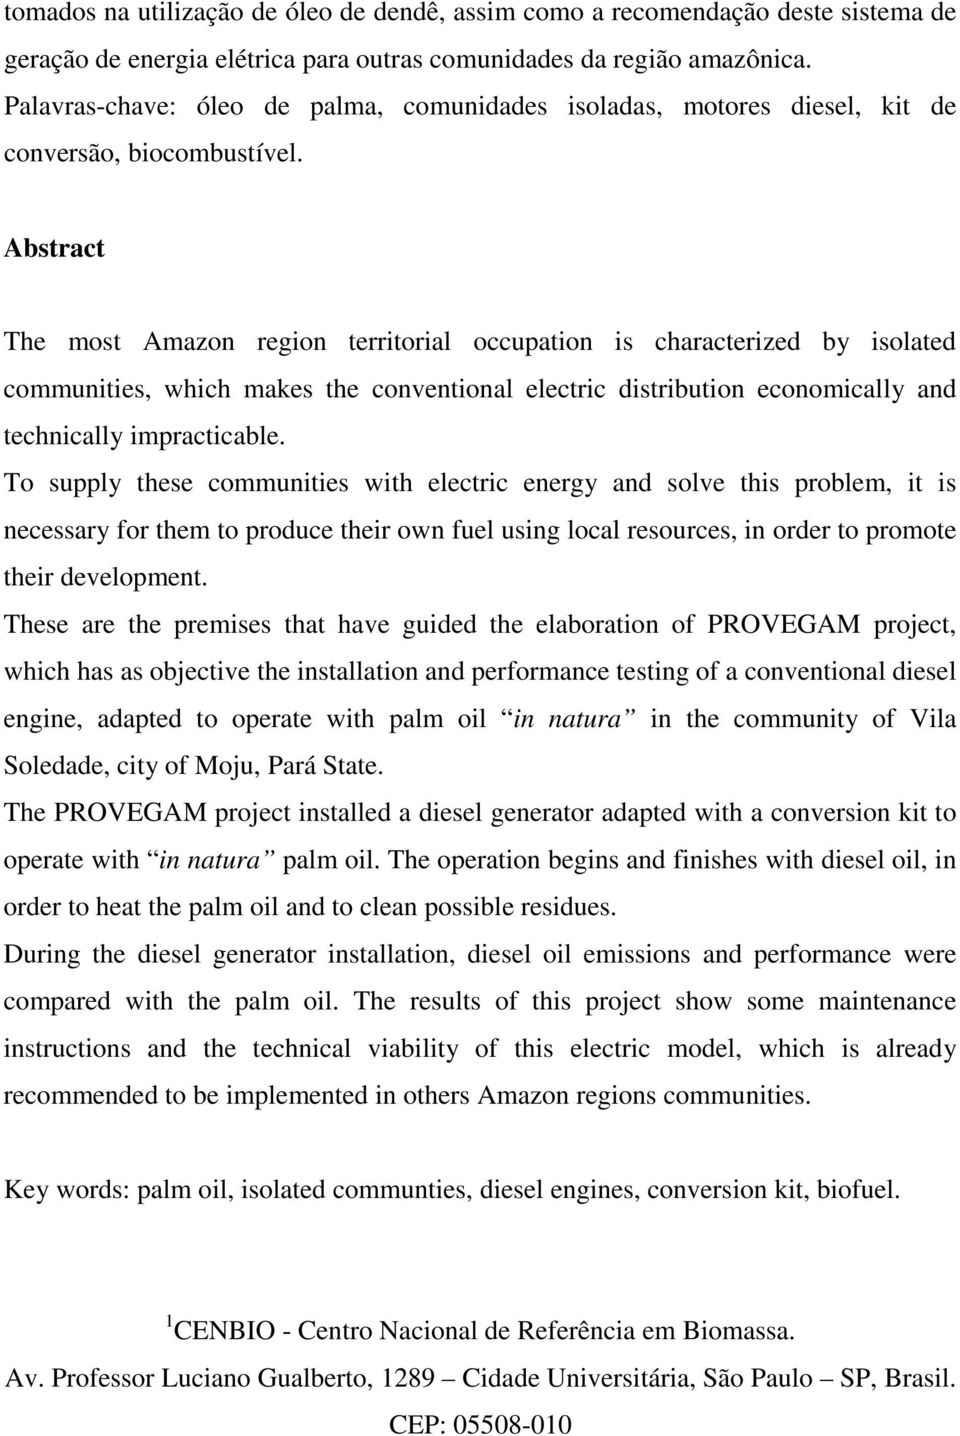 Abstract The most Amazon region territorial occupation is characterized by isolated communities, which makes the conventional electric distribution economically and technically impracticable.